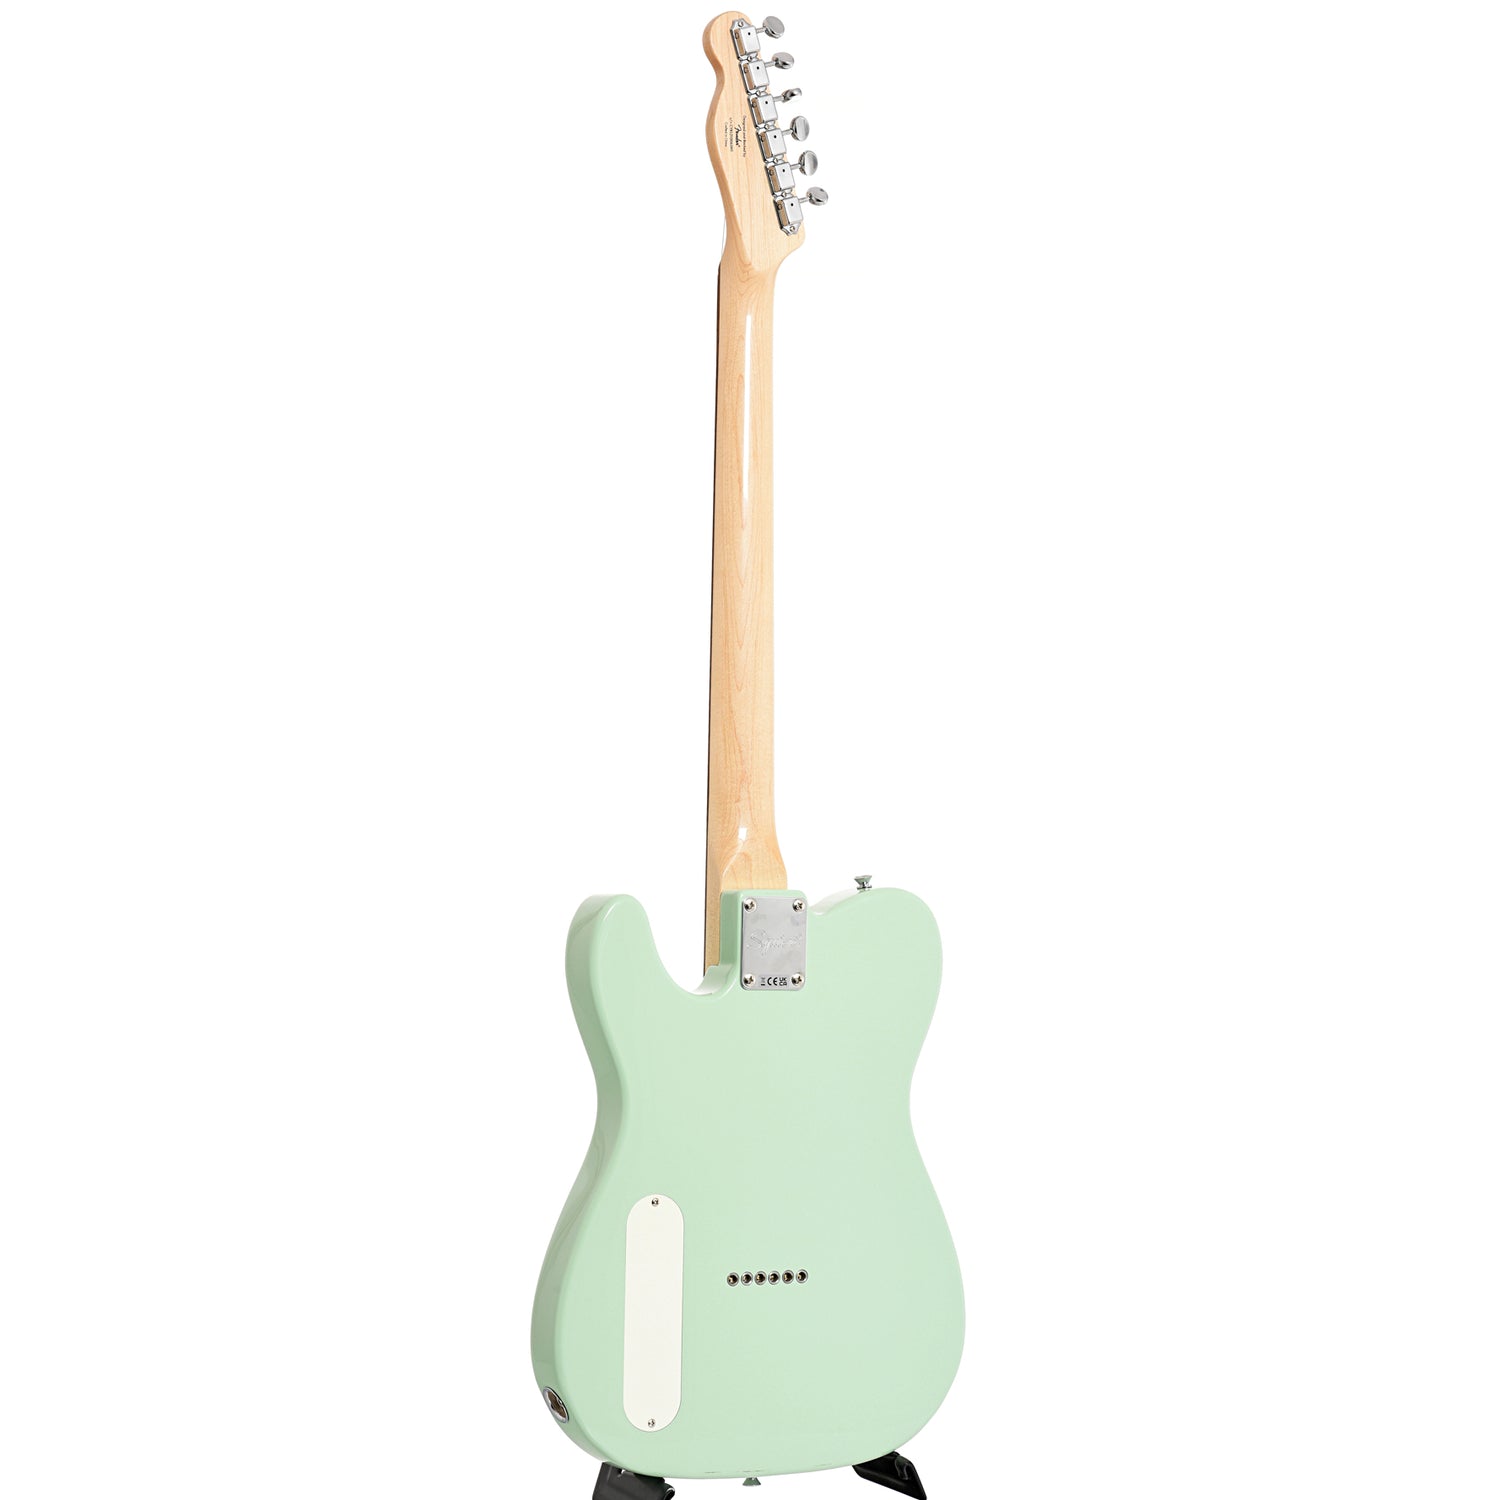 Image 12 of Squier Paranormal Baritone Cabronita Telecaster, Surf Green- SKU# SPBARICT-SFG : Product Type Other : Elderly Instruments